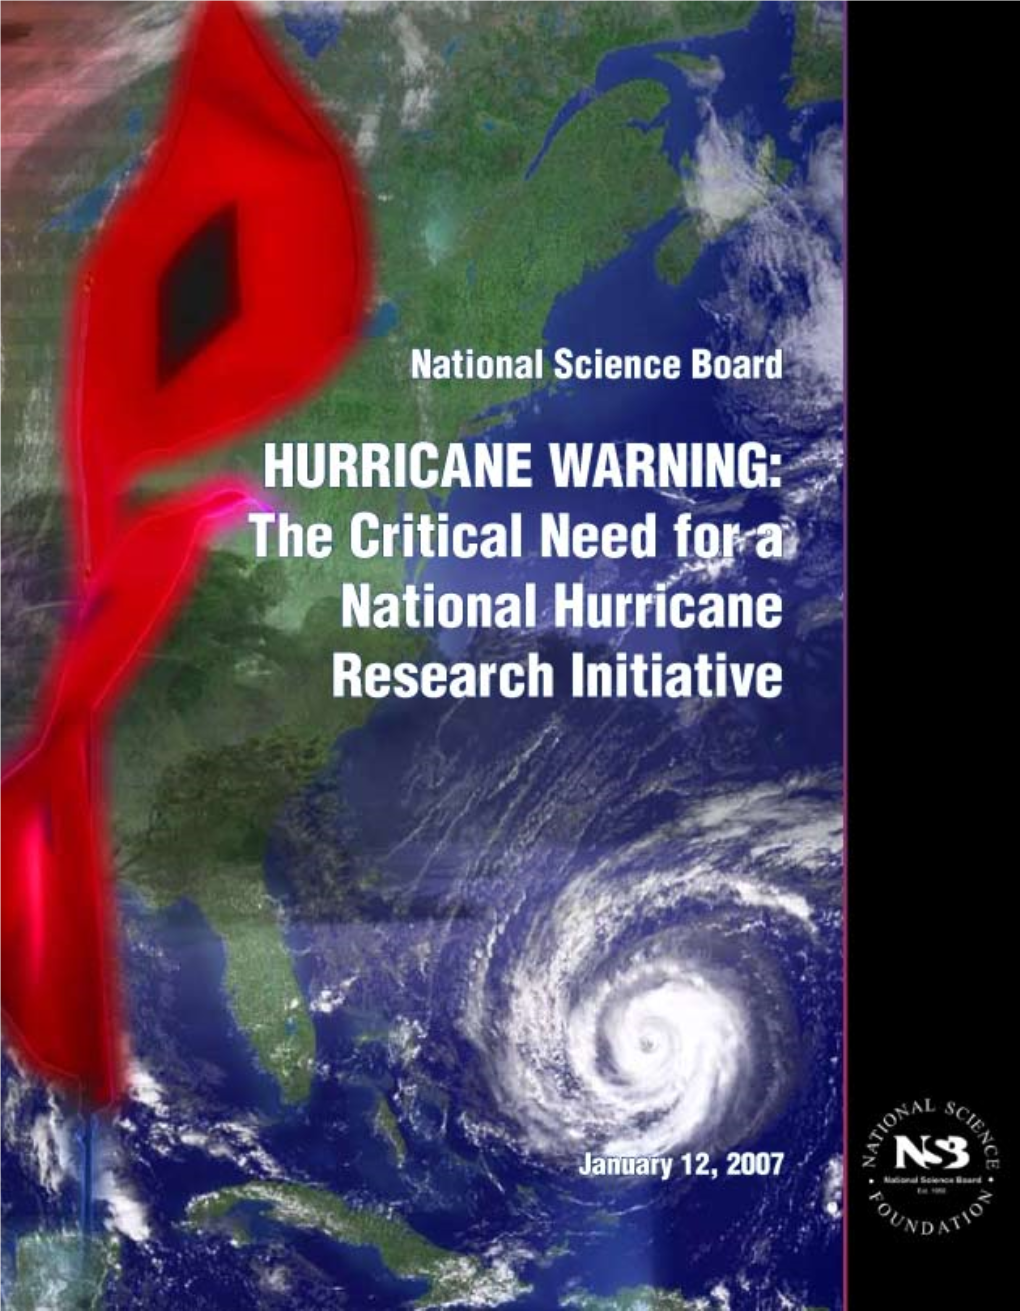 The Critical Need for a National Hurricane Research Initiative